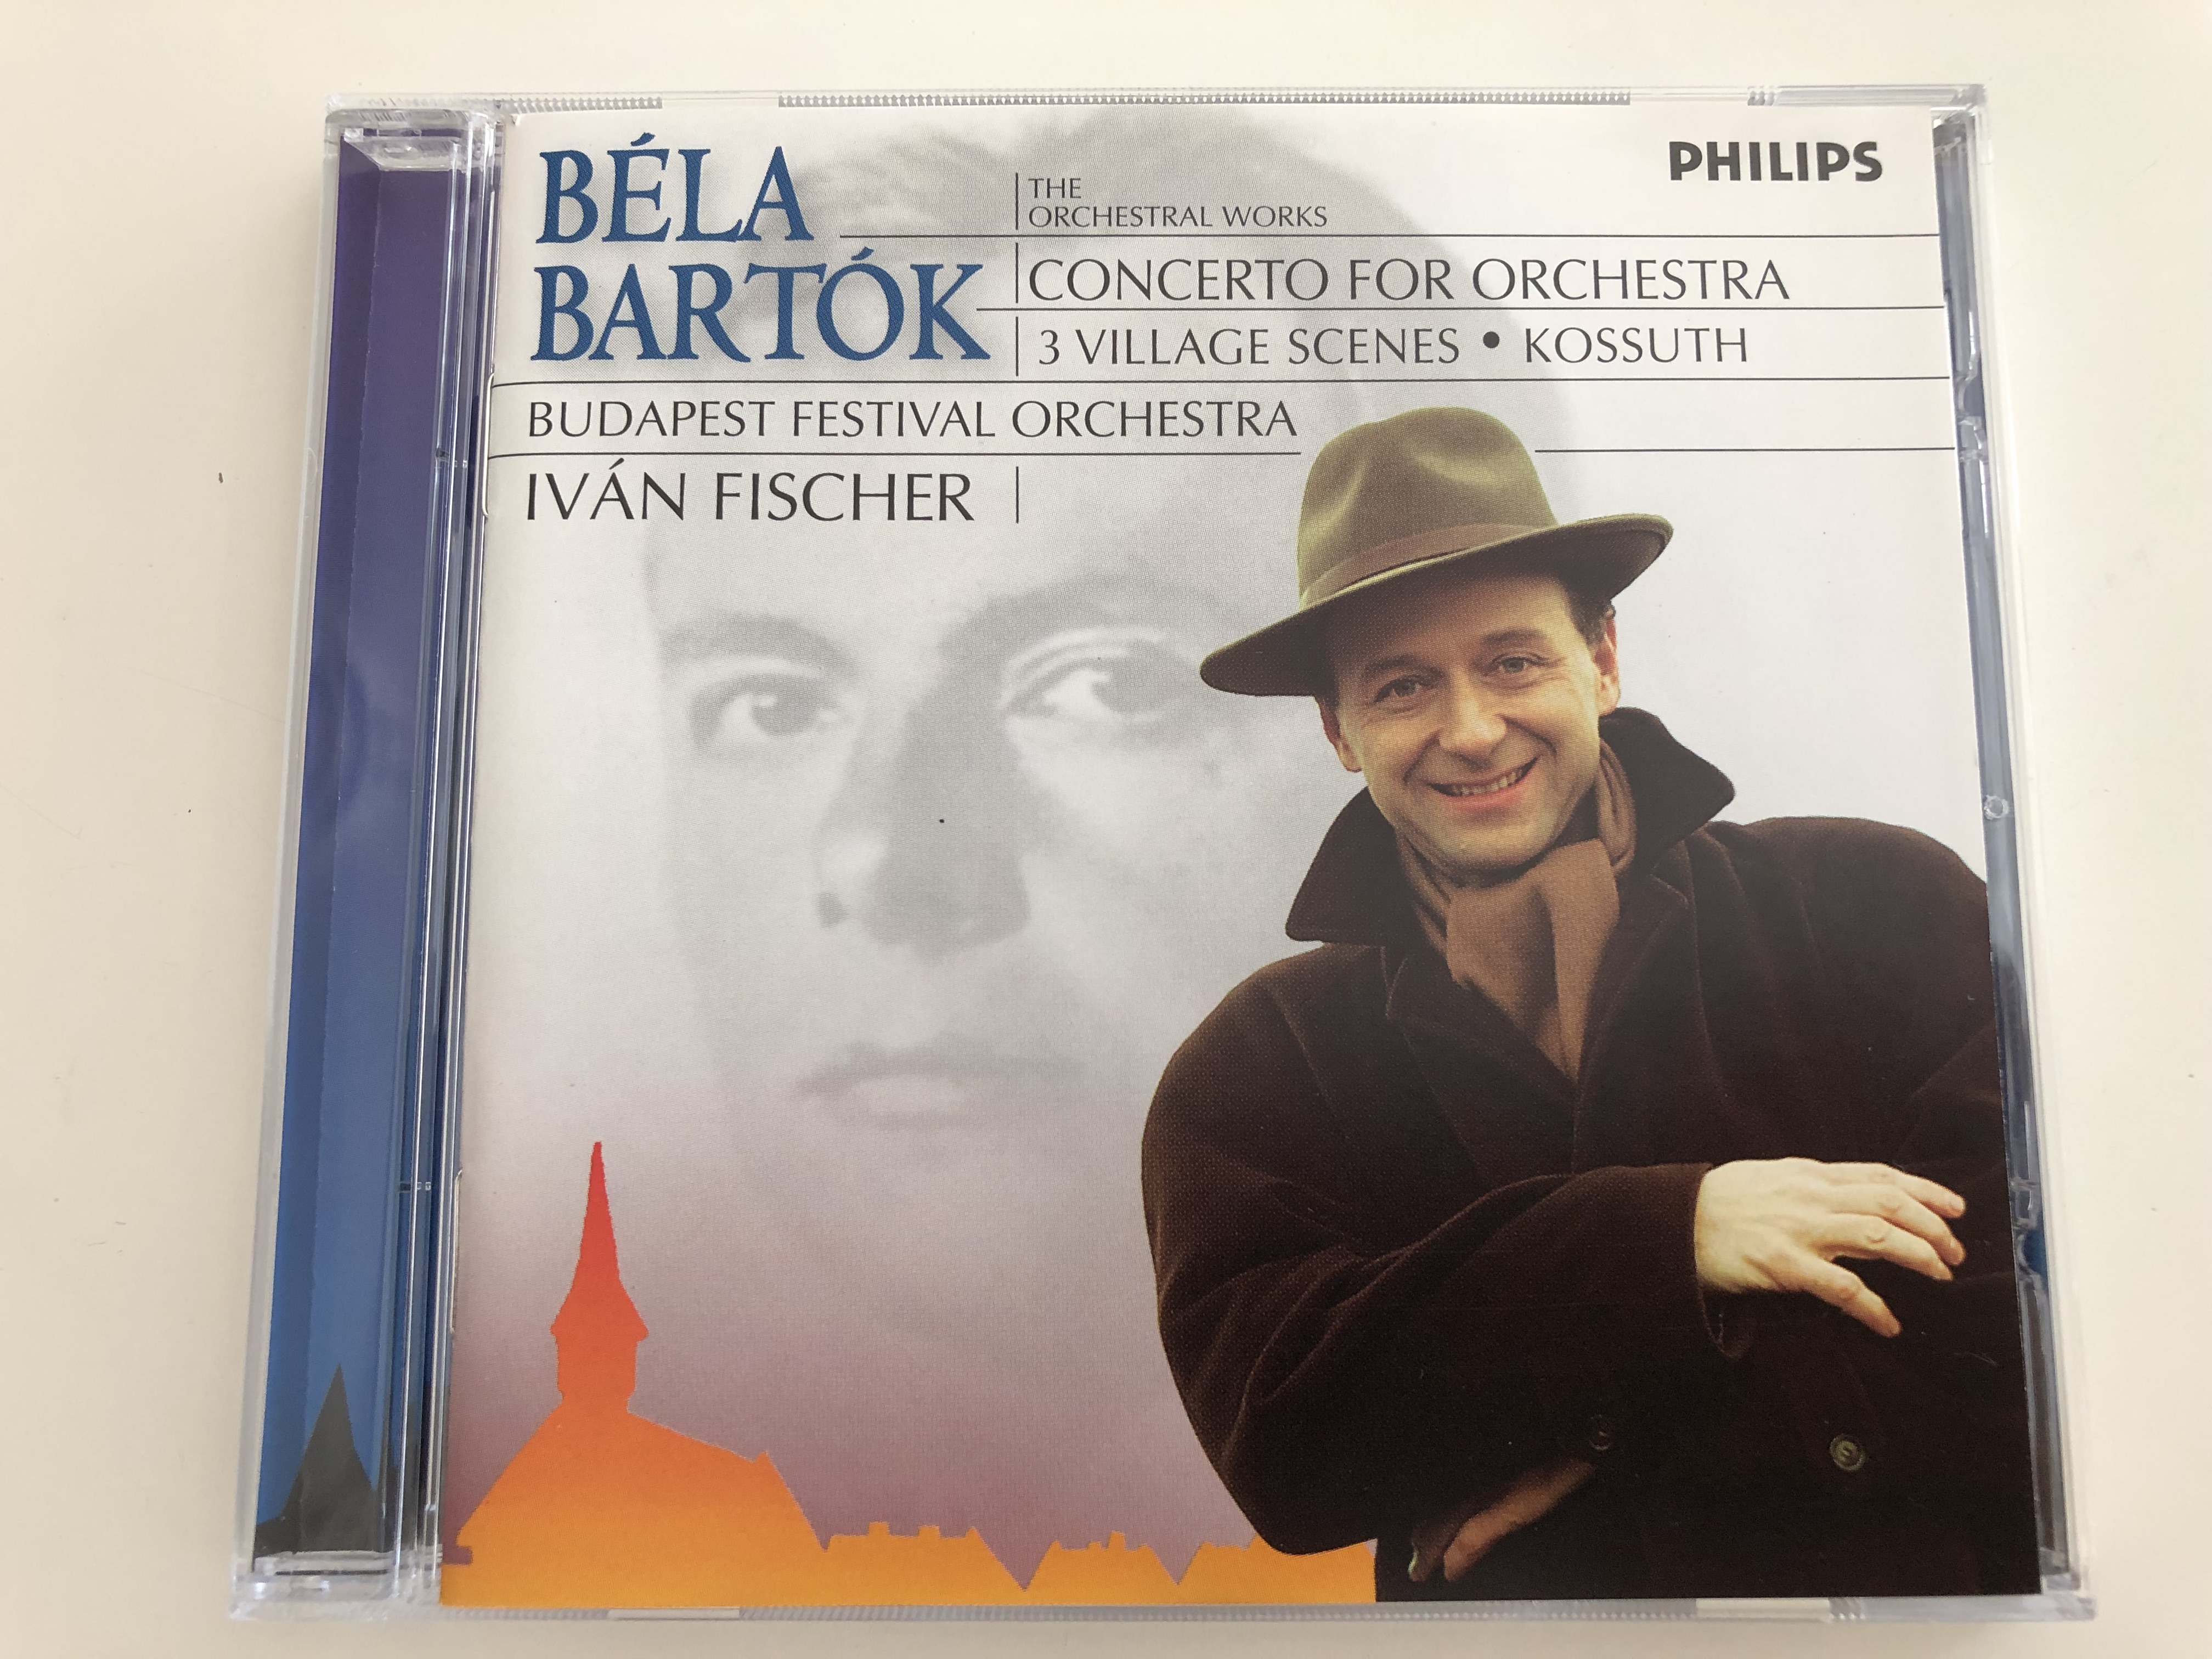 b-la-bart-k-concerto-for-orchestra-3-village-scenes-kossuth-budapest-festival-orchestra-conducted-by-ivan-fischer-philips-classics-audio-cd-1998-456-575-2-1-.jpg